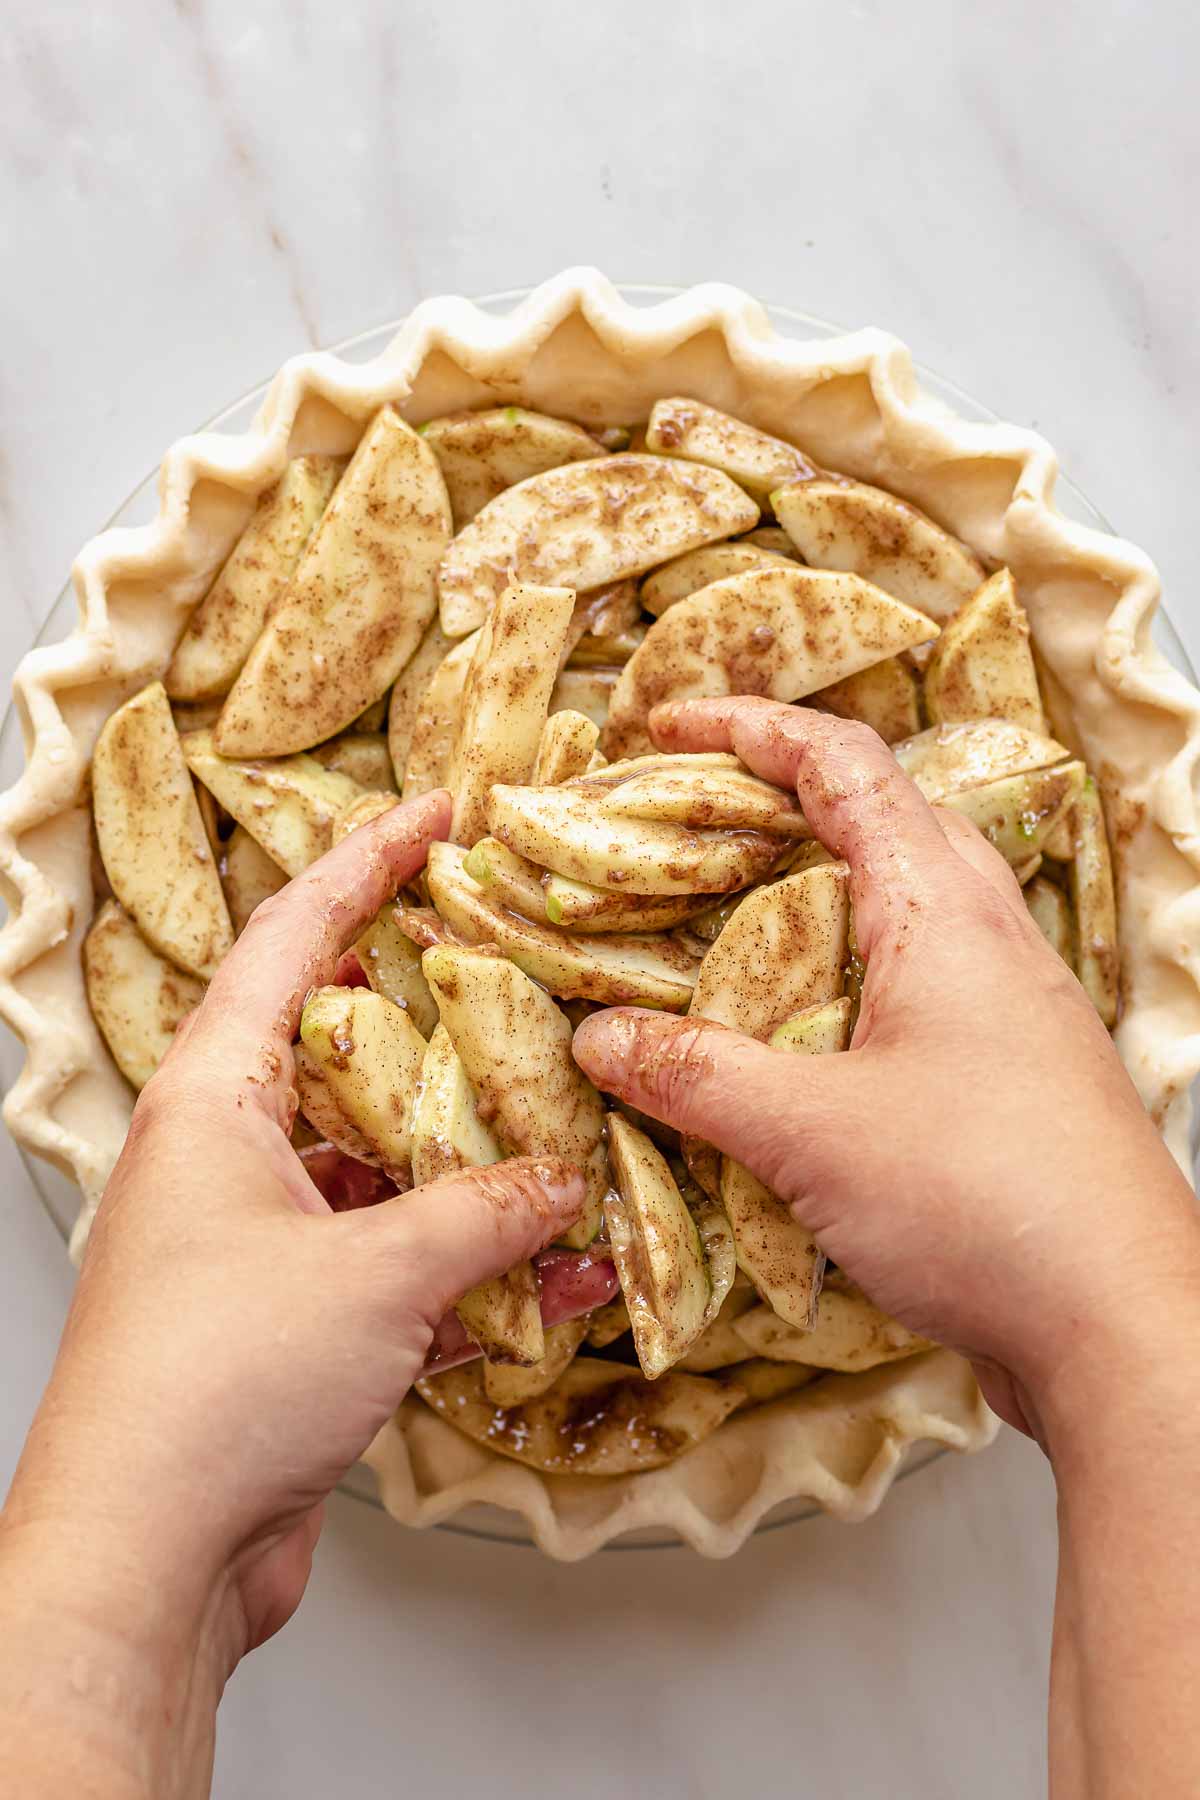 Hands adding spiced apple slices to a pie crust.